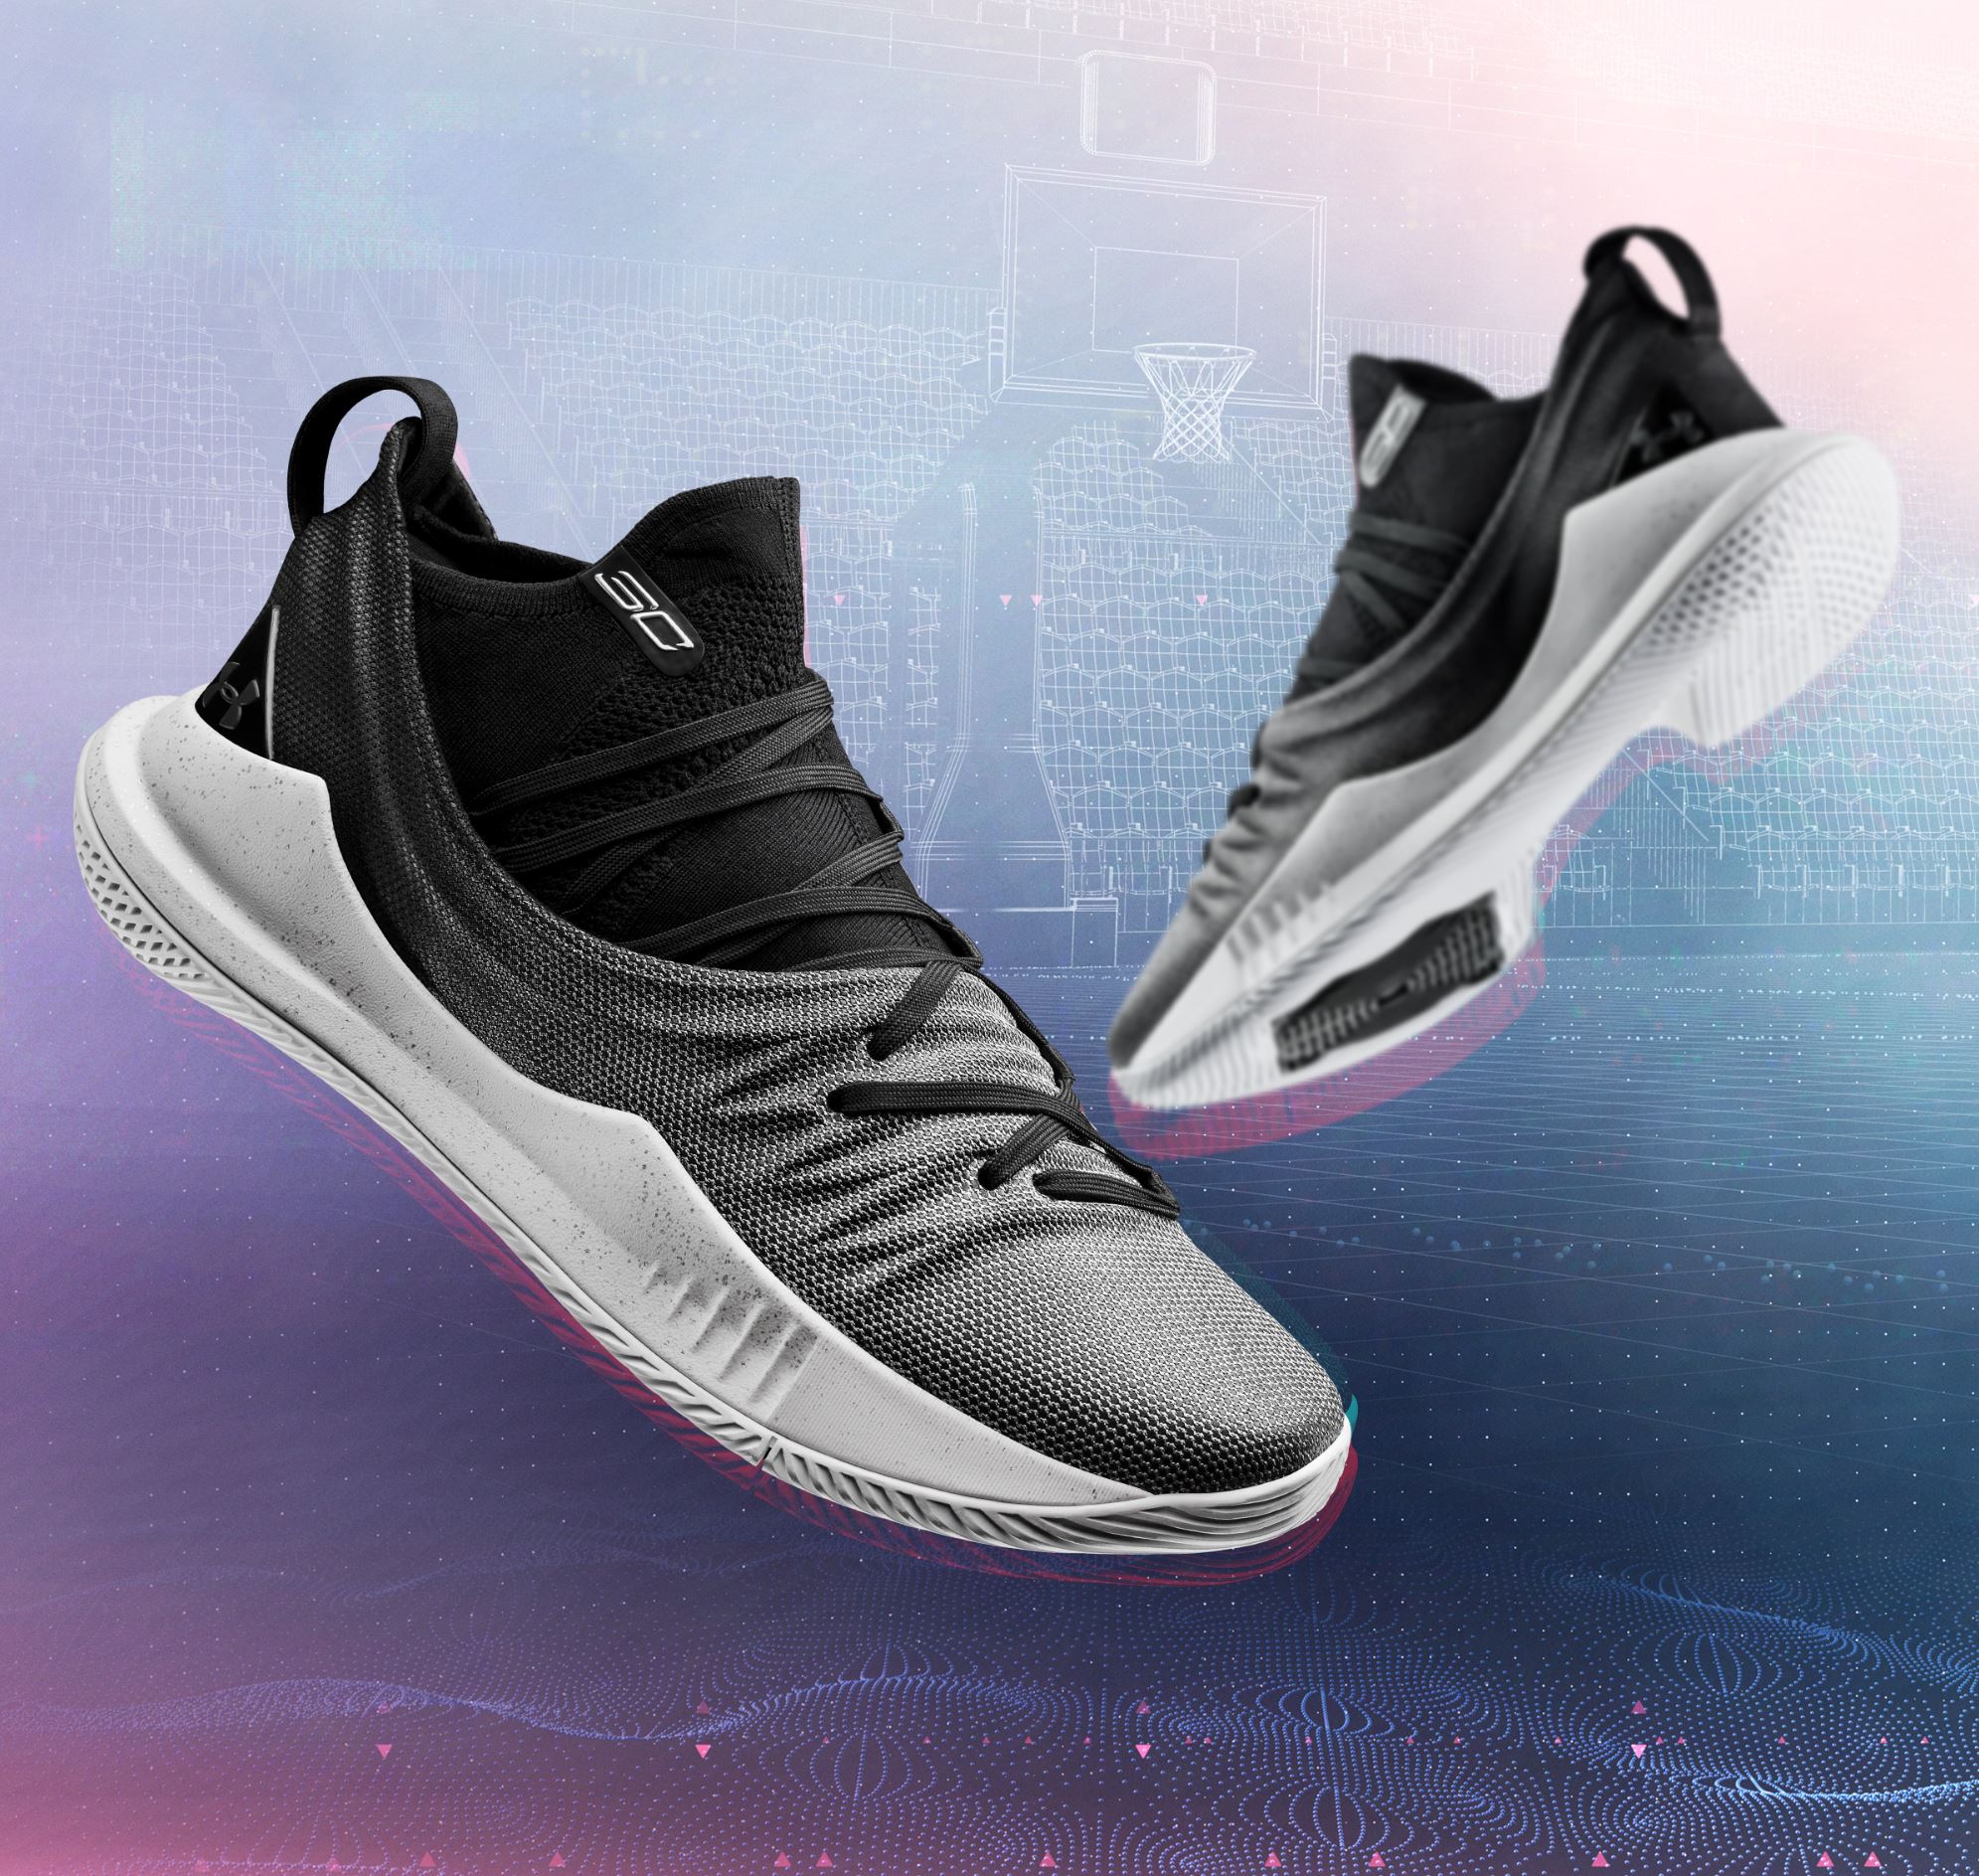 curry 5 black white release date